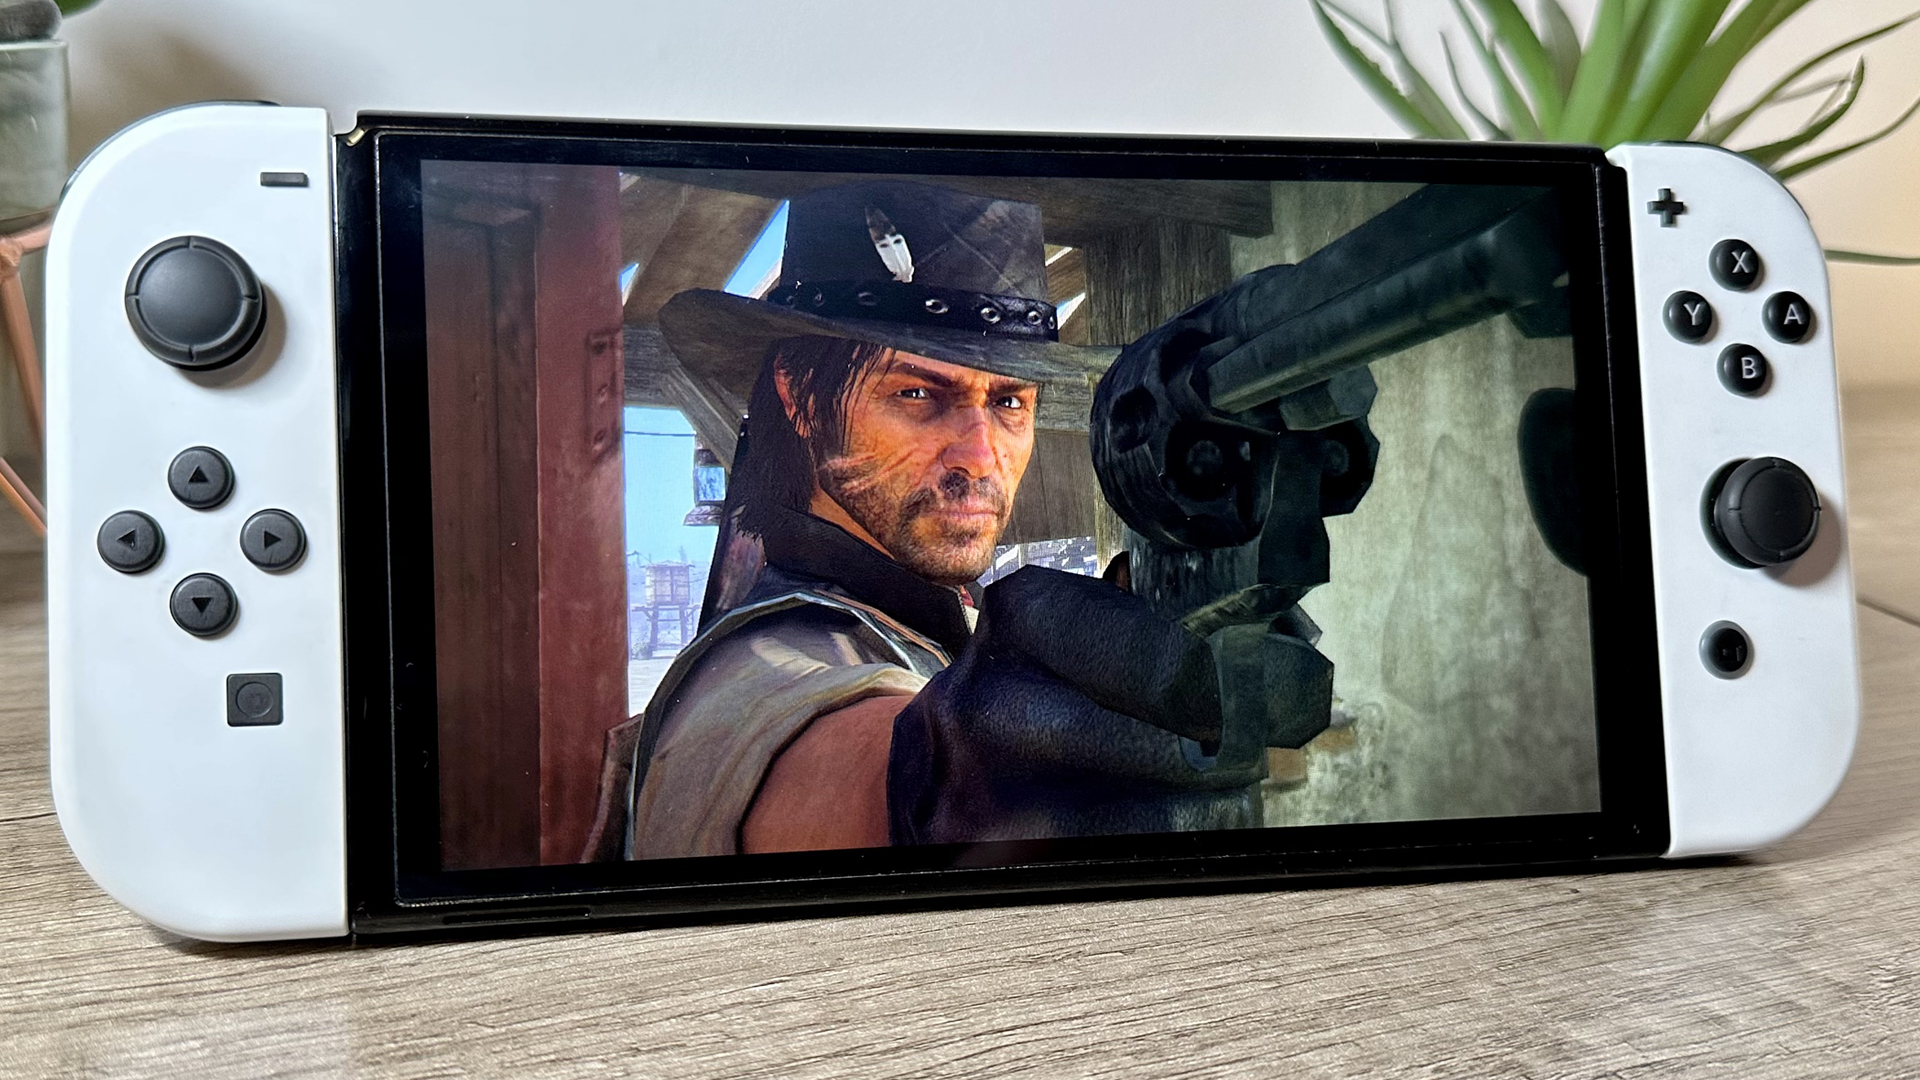 Red Dead Redemption on Switch and PS4 is official, not a remake or